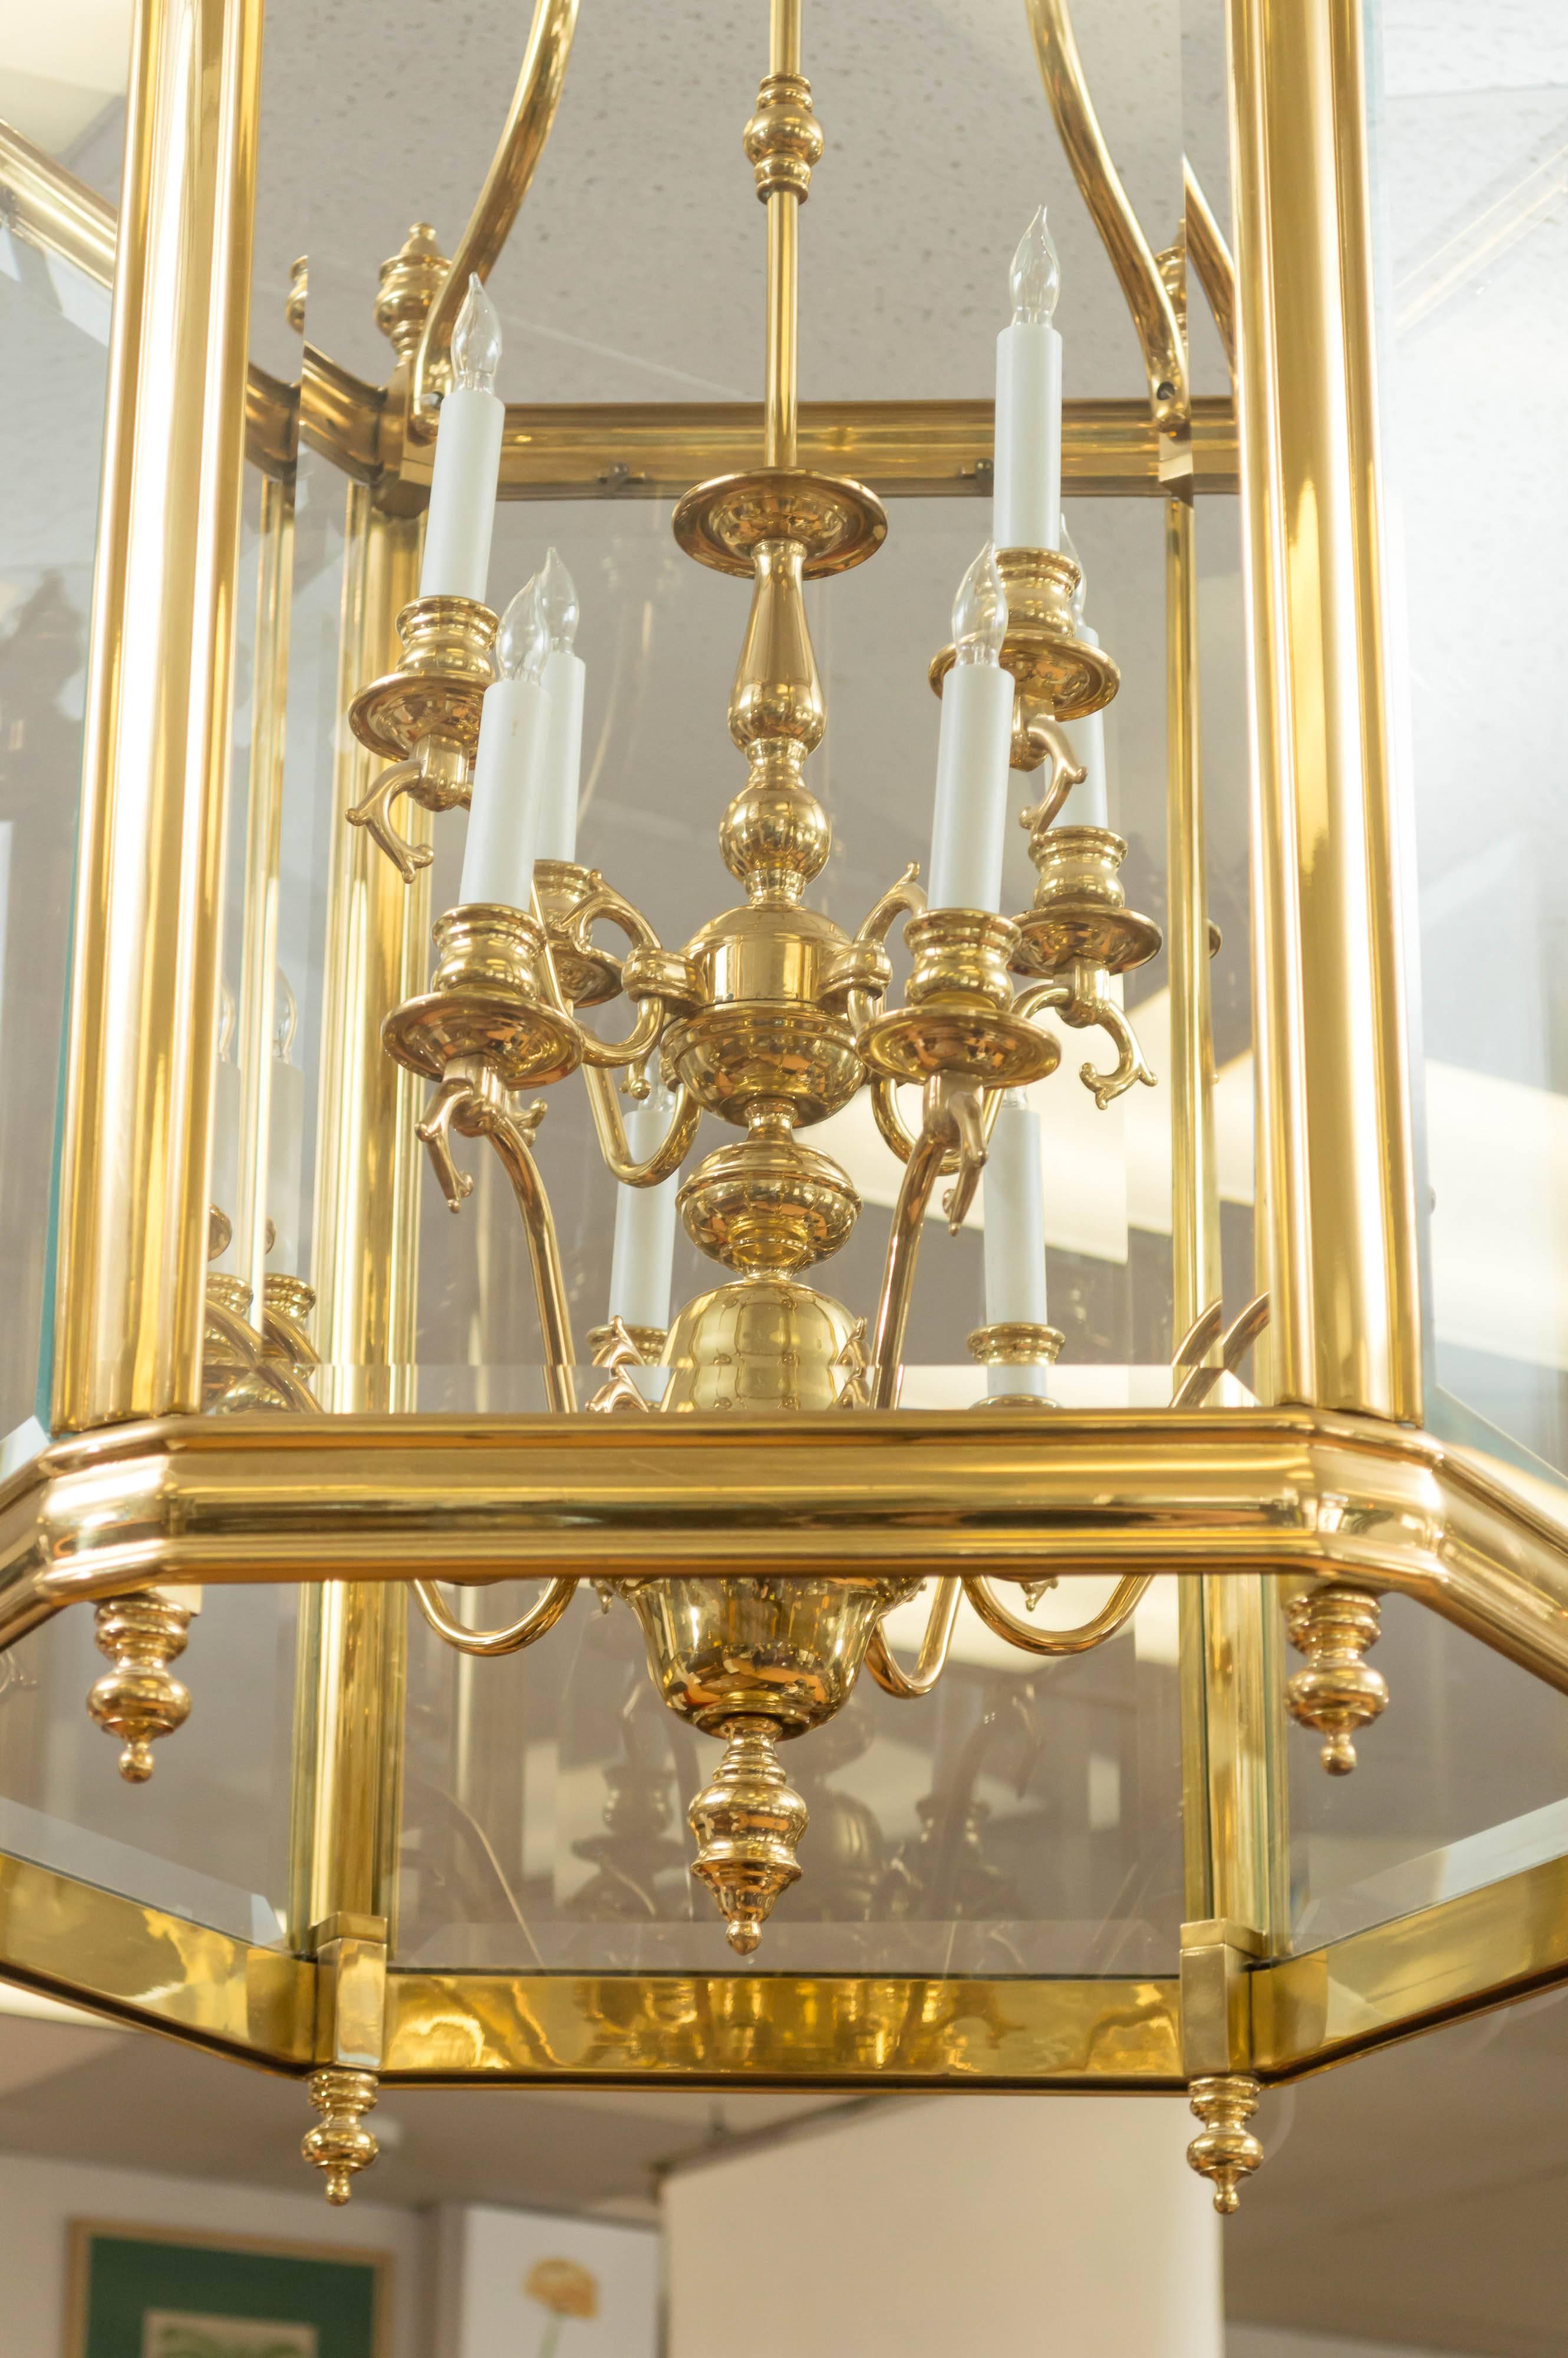 A grand entry demands equally grand lighting and this majestically scaled brass and glass lantern pendant regally fits the bill.

The sculptural Dutch-style tiered chandelier at its center has elegant laurel swag arms that hold aloft 12